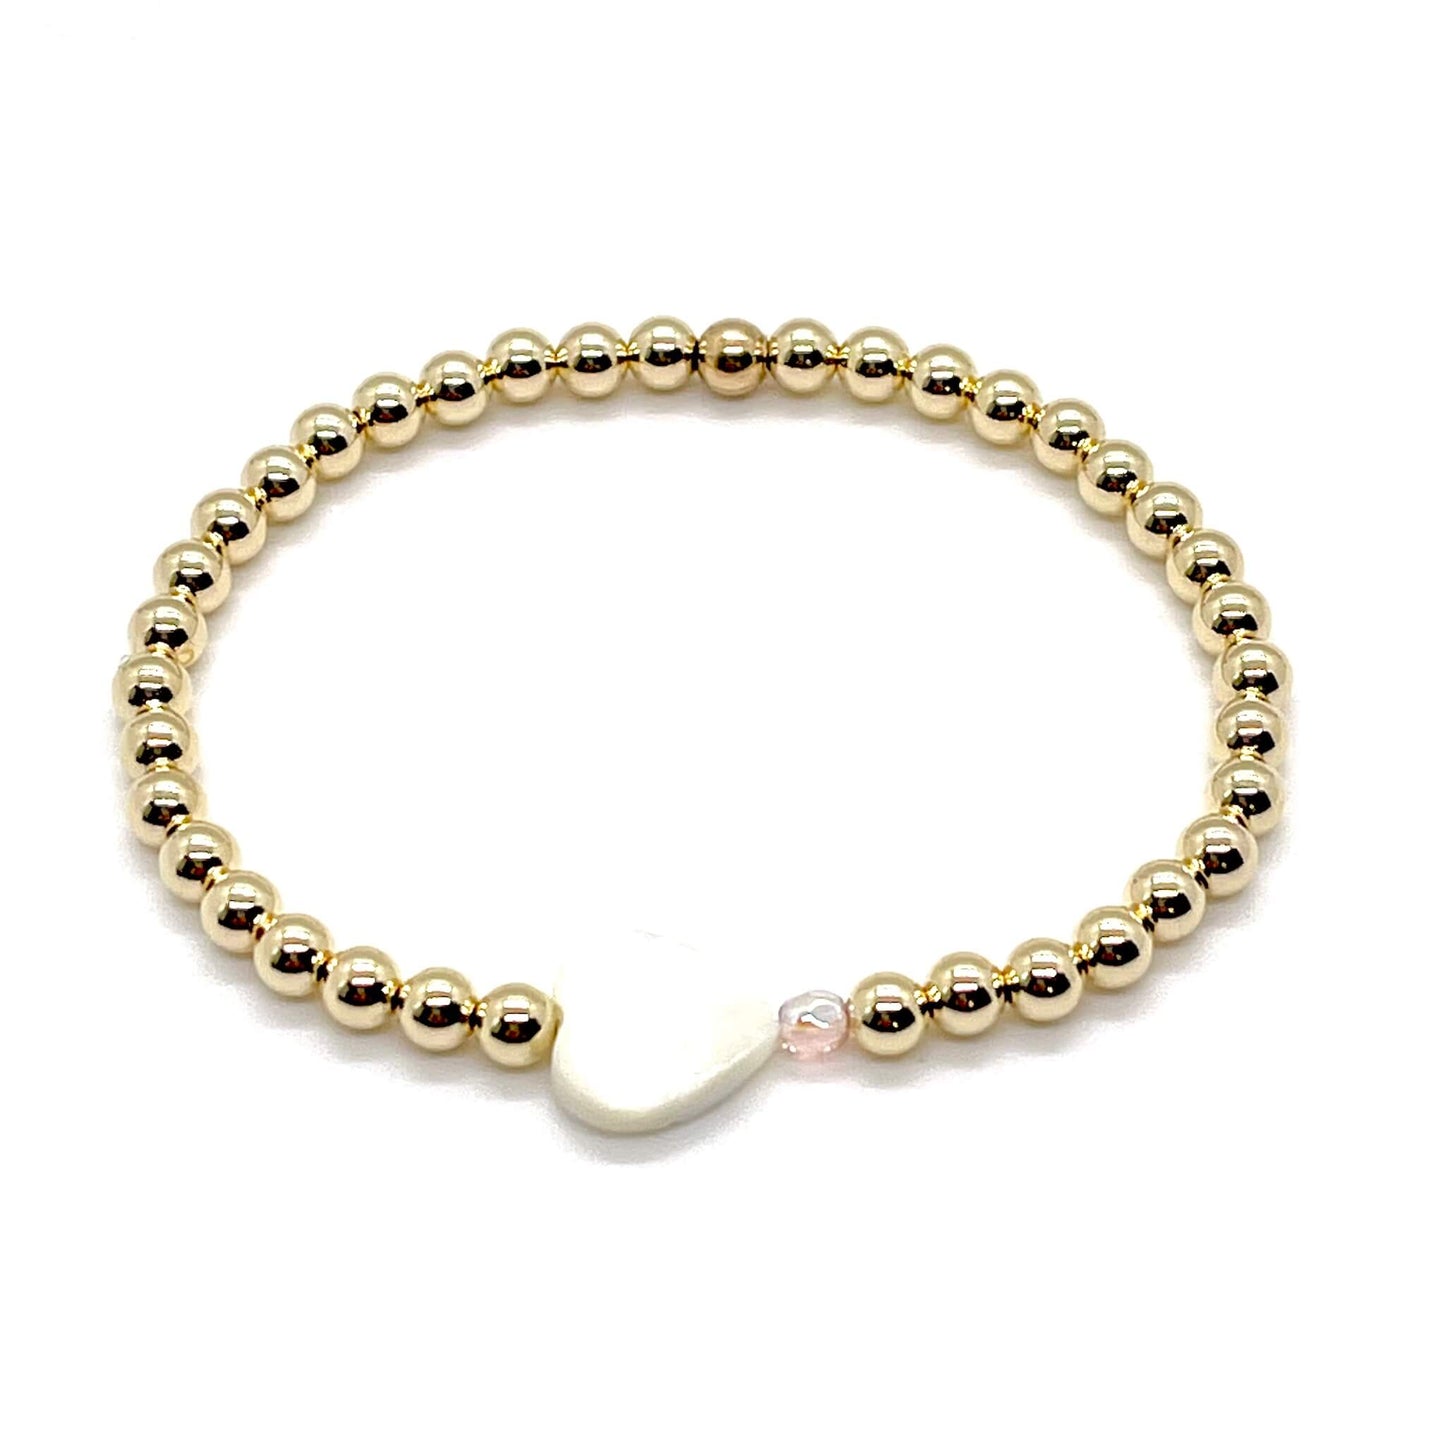 Gold heart bracelet with a mother-of-pearl heart, a small faceted blush-rose crystal, and 4mm 14K gold filled beads.